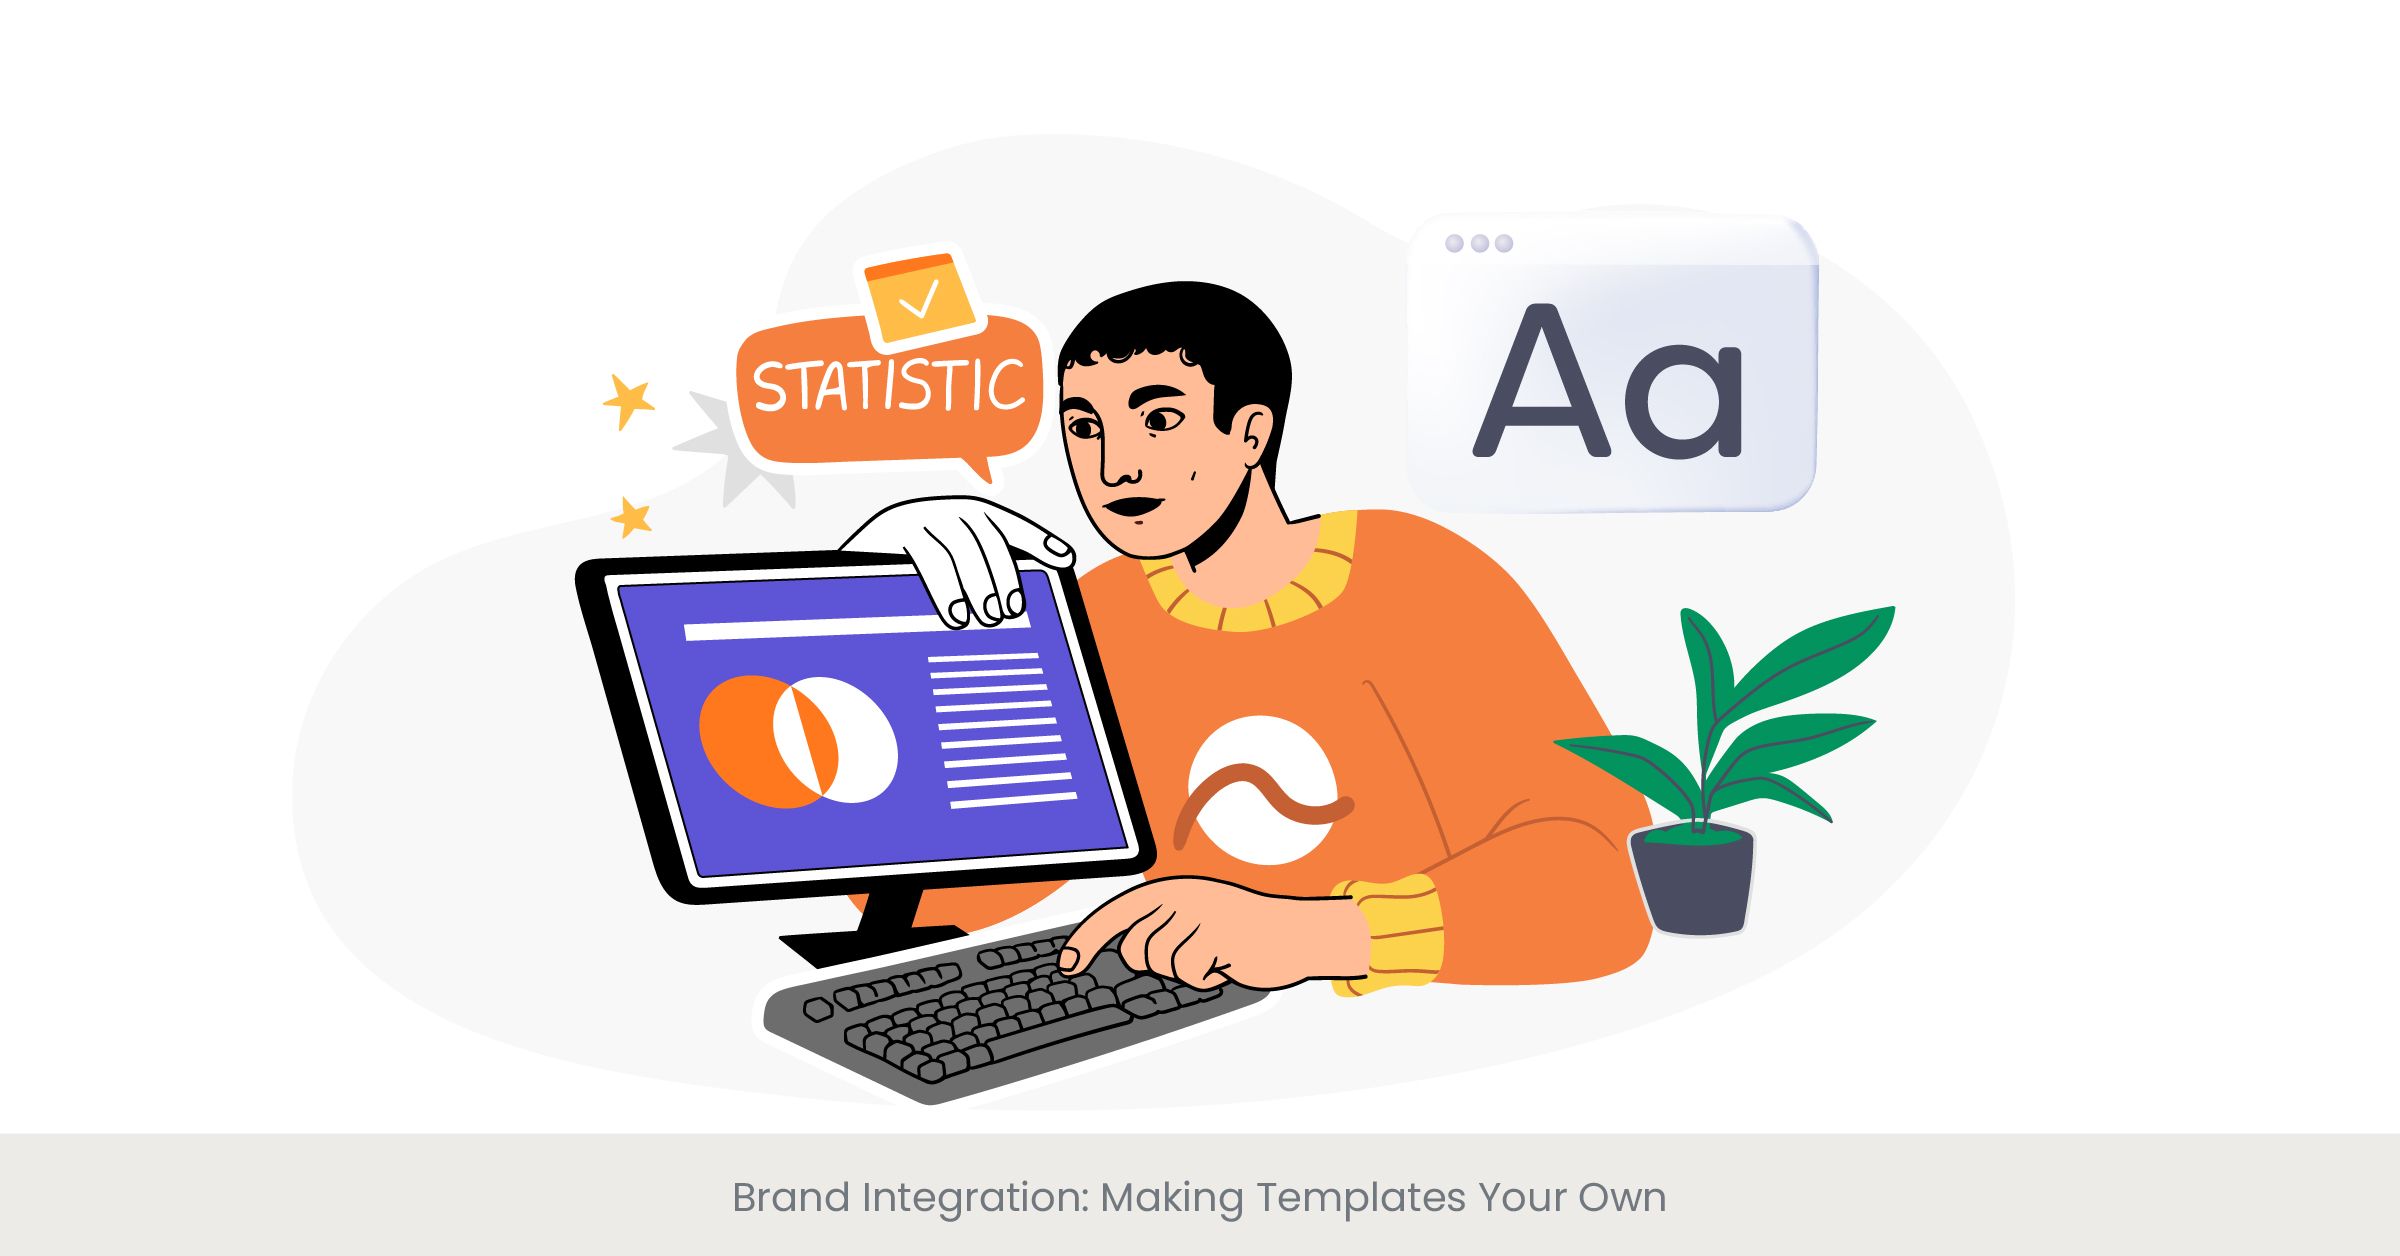 Brand Integration: Making Templates Your Own